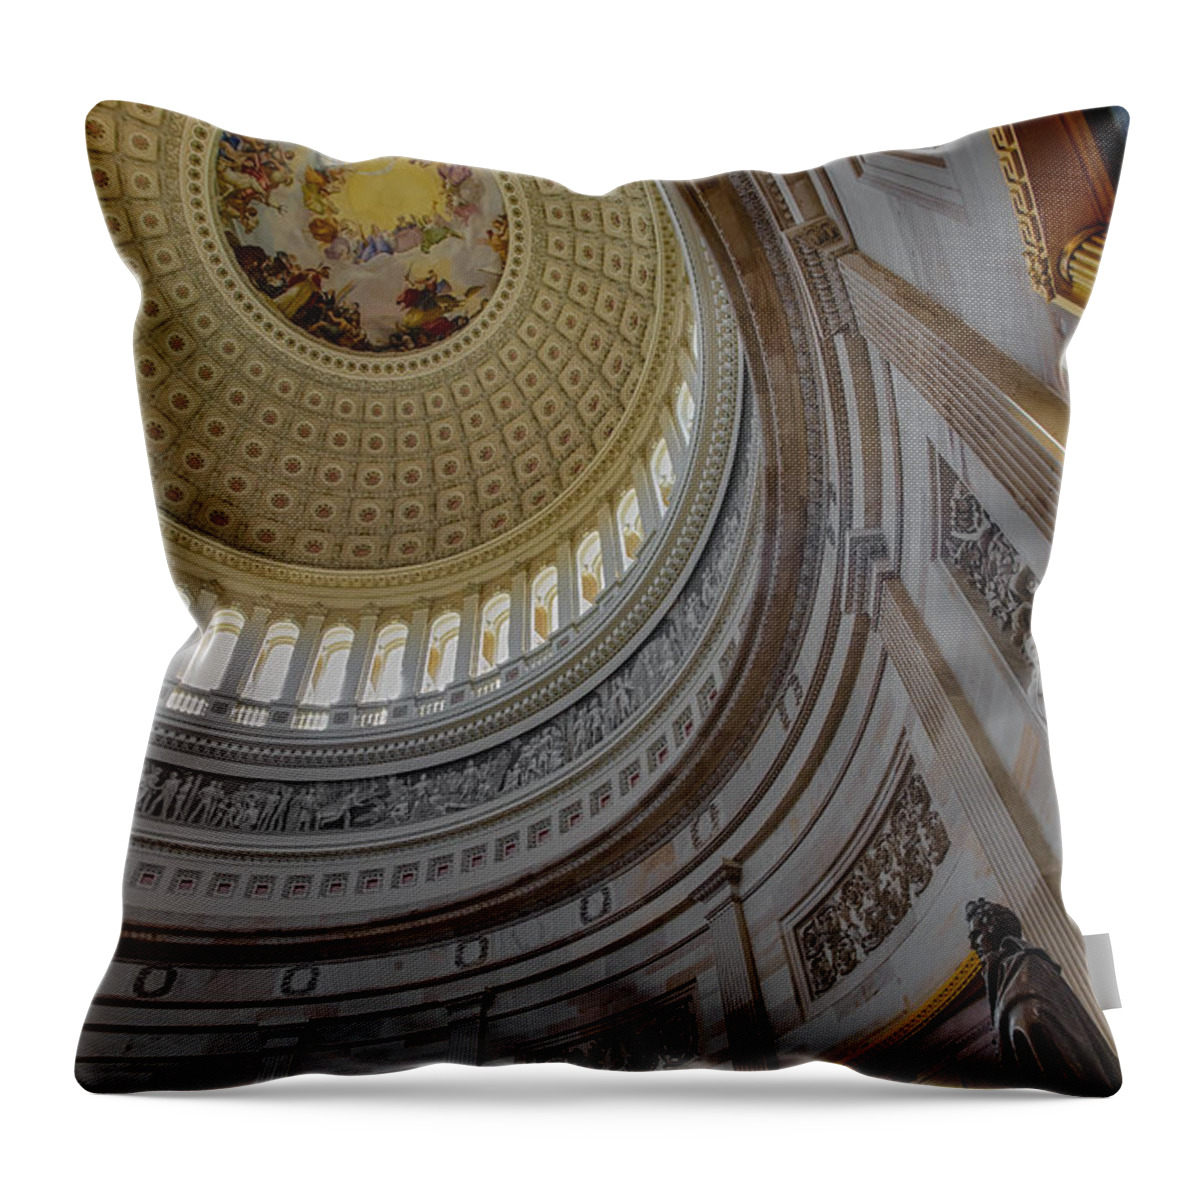 America Throw Pillow featuring the photograph Unites States Capitol Rotunda by Susan Candelario